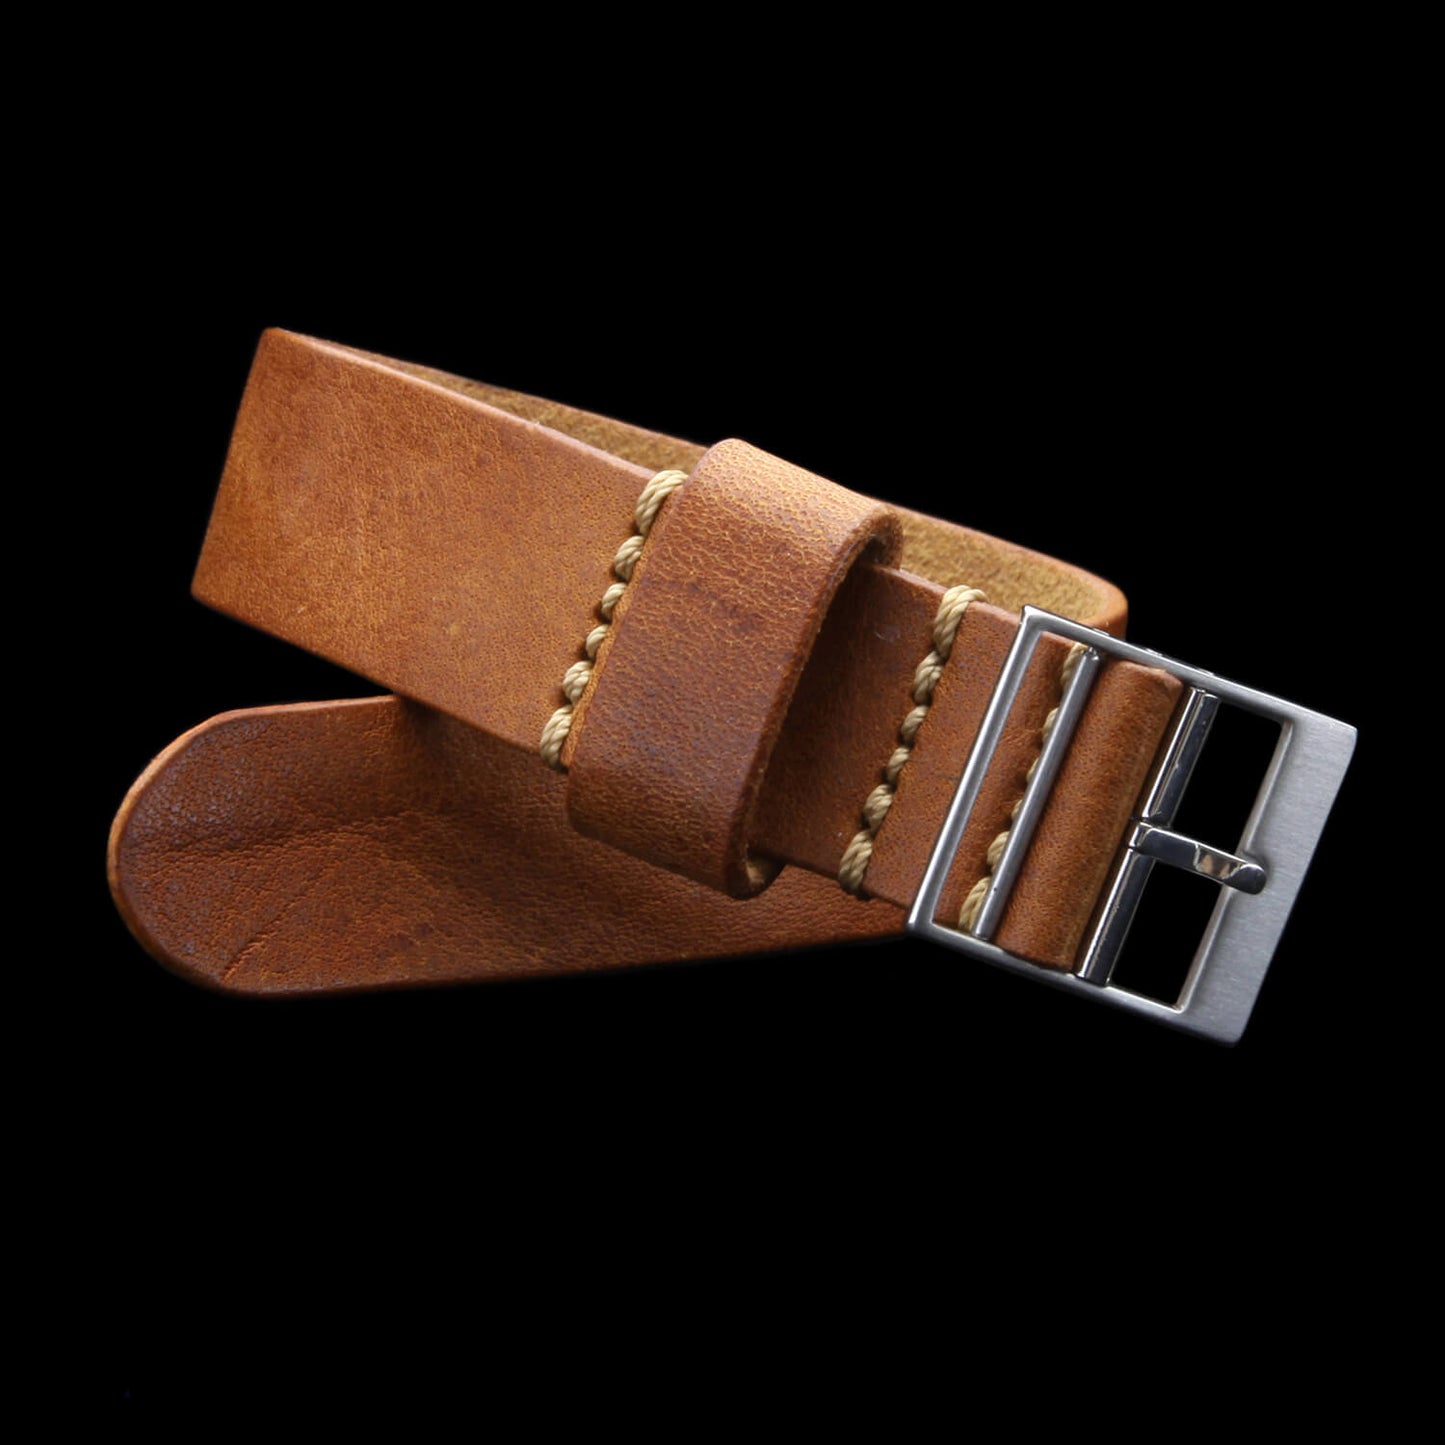 Leather Watch Strap, Classic RAF II Vintage 402 | Ladder Buckle | Full Grain Italian Vegetable-Tanned Leather | Cozy Handmade